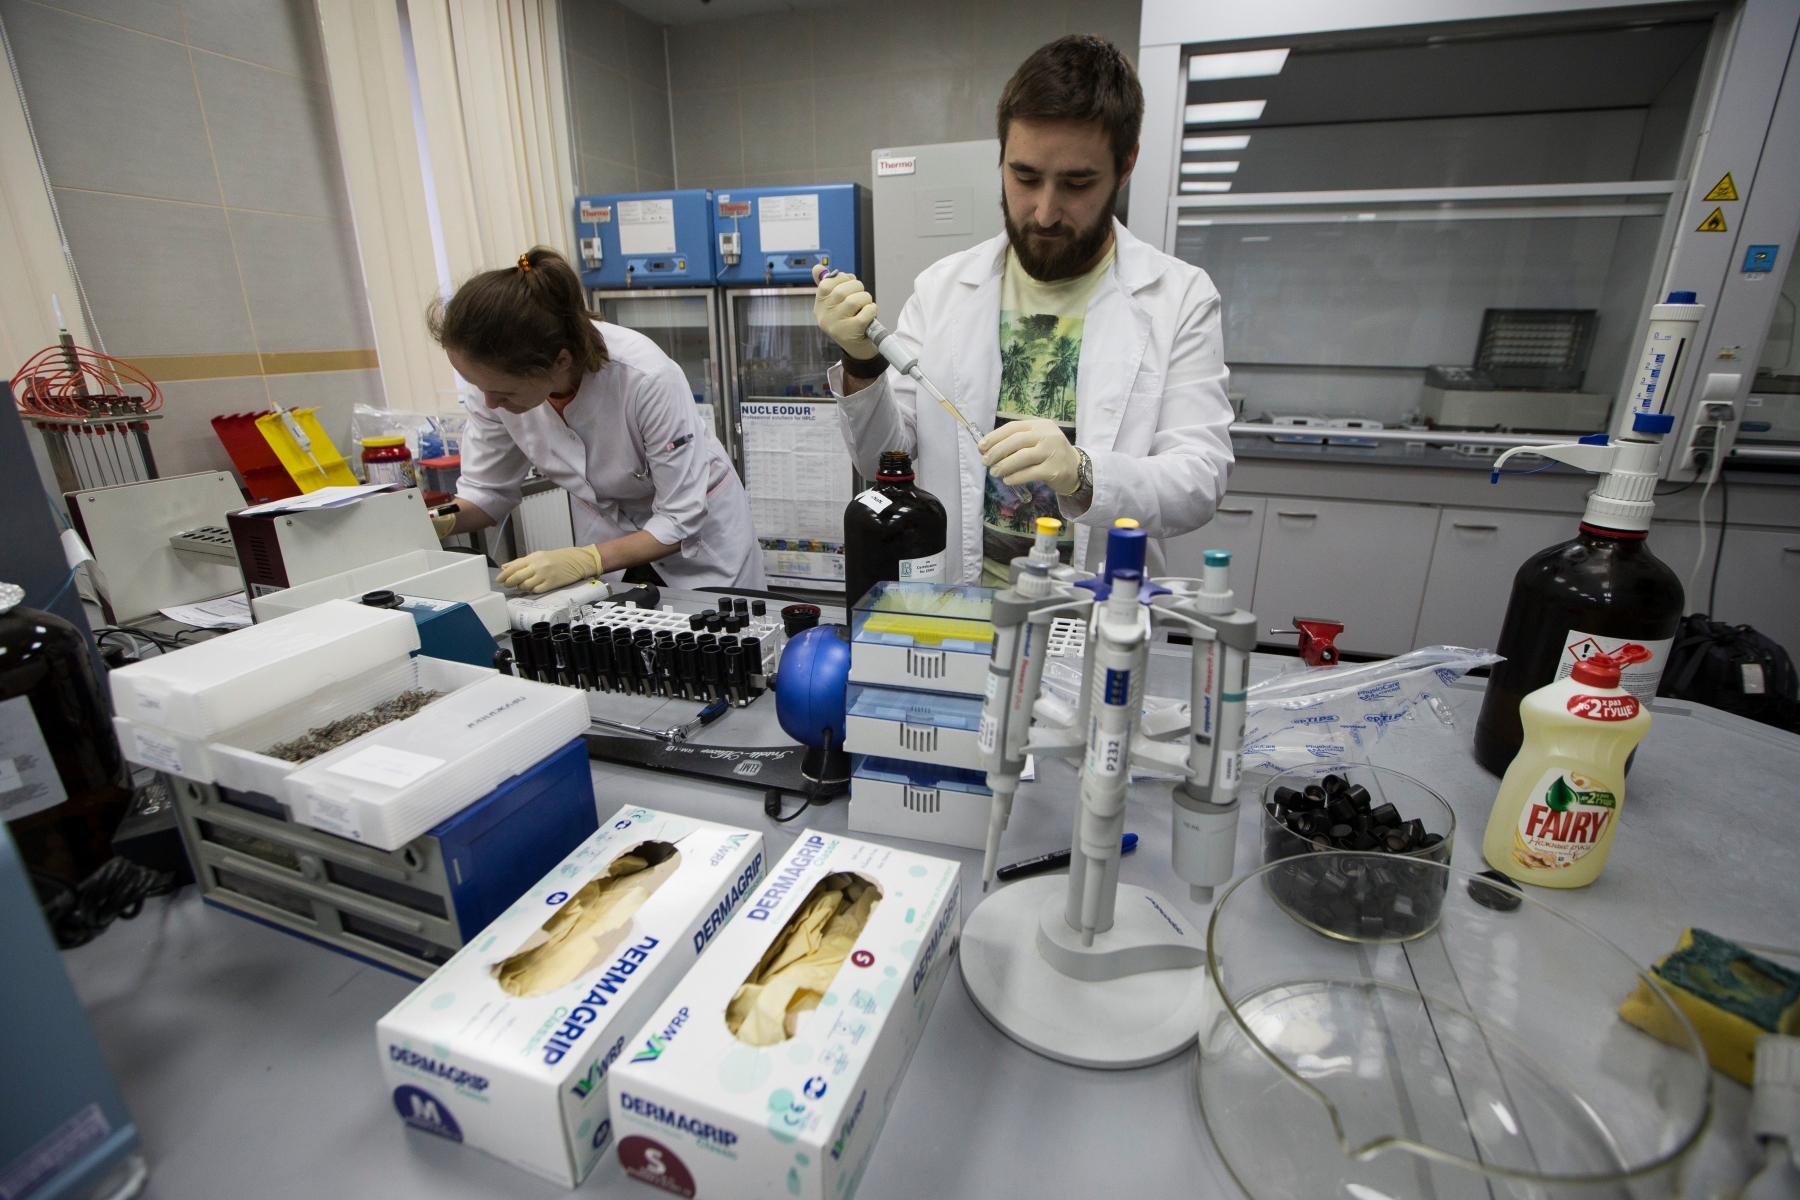 ARCHIVBILD ZU DOPING IN RUSSLAND ---Employees Natalya Bochkaryova, left, and Ilya Podolsky work at the Russia's national drug-testing laboratory in Moscow, Russia, Tuesday, May 24, 2016. The Russians have been accused of state-sponsored doping at the 2014 Sochi Olympics, and the IOC has asked WADA to carry out a full-fledged investigation and plans to retest Sochi samples. Russian Anti Doping Agency RUSADA organised a press tour of its anti doping laboratory on Tuesday. (AP Photo/Alexander Zemlianichenko) RUSSIA DOPING